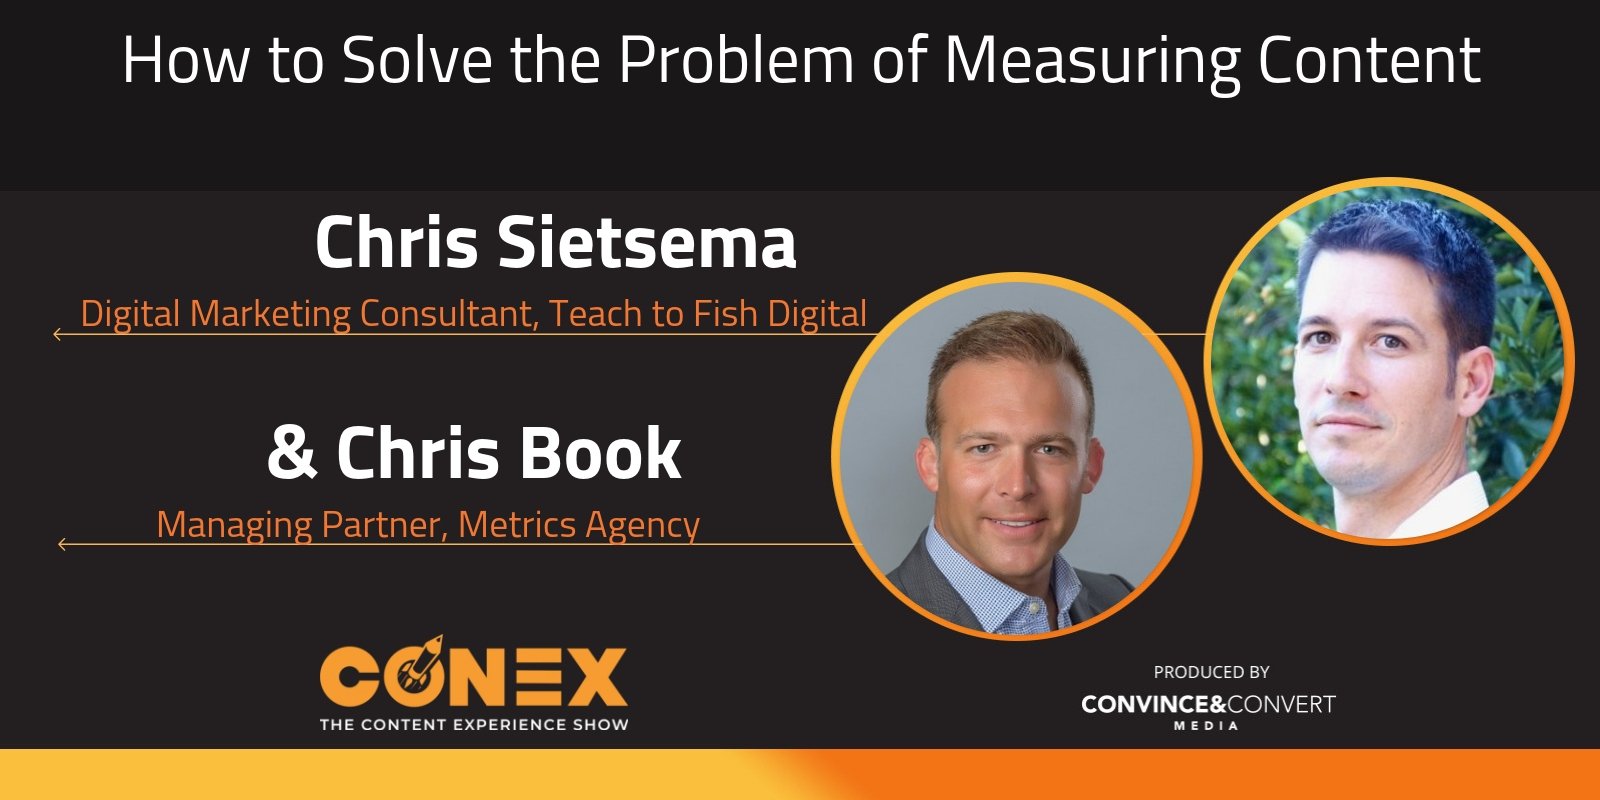 How to Solve the Problem of Measuring Content